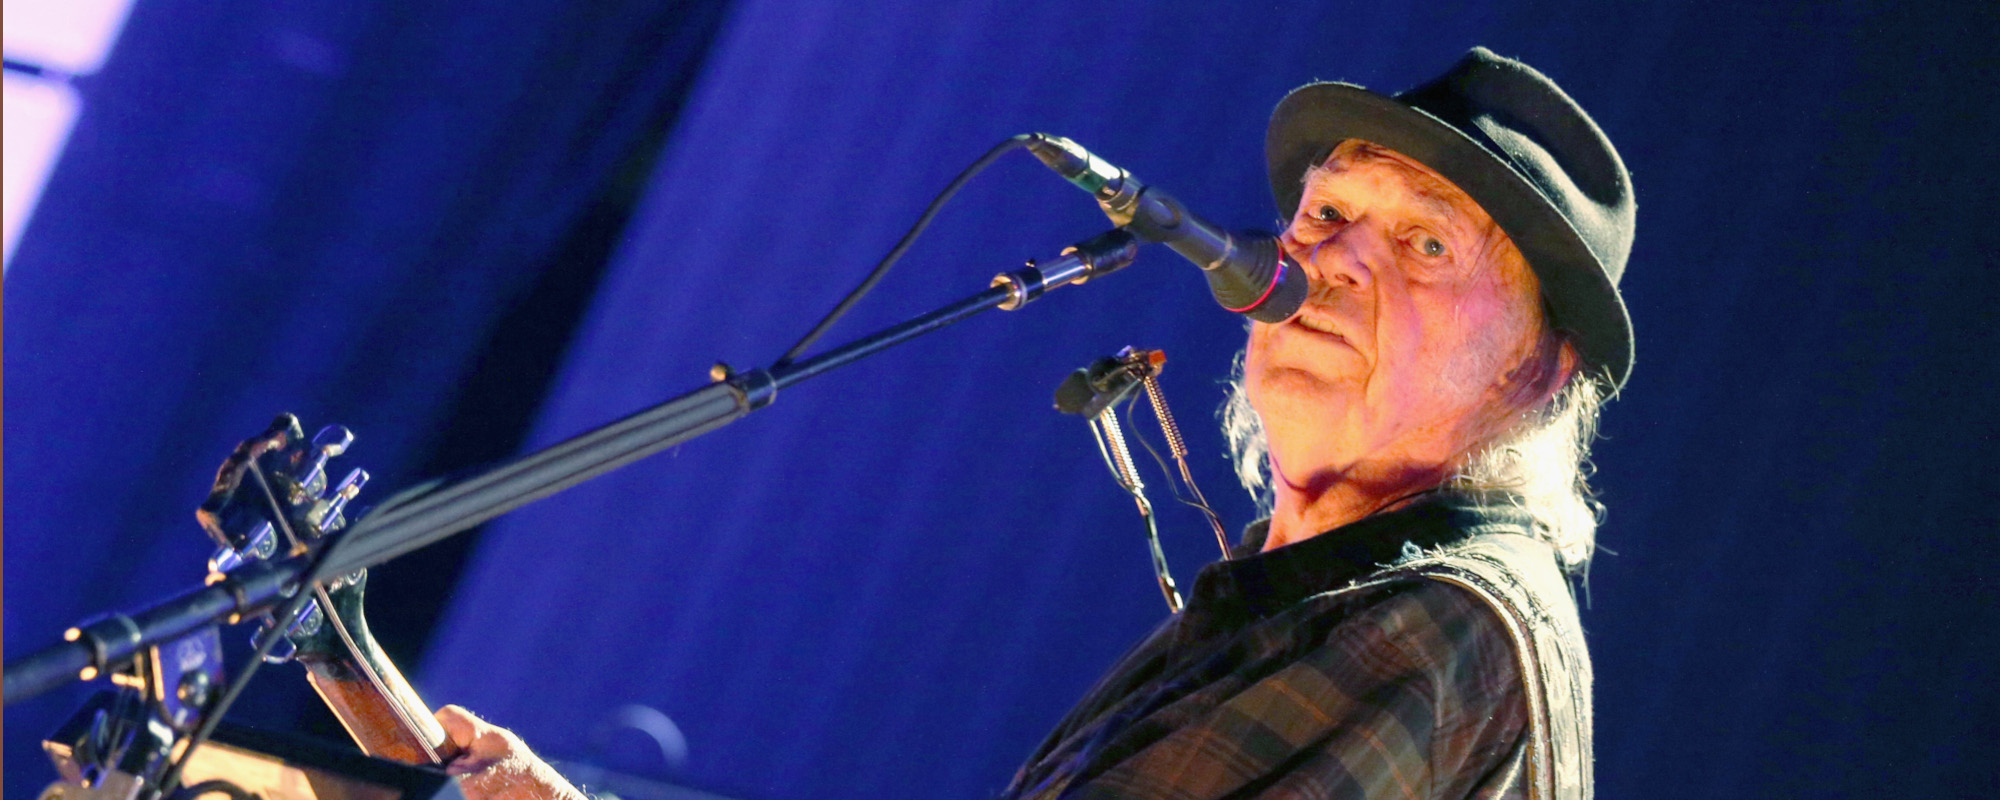 3 Facts About Neil Young That Fans May Not Know